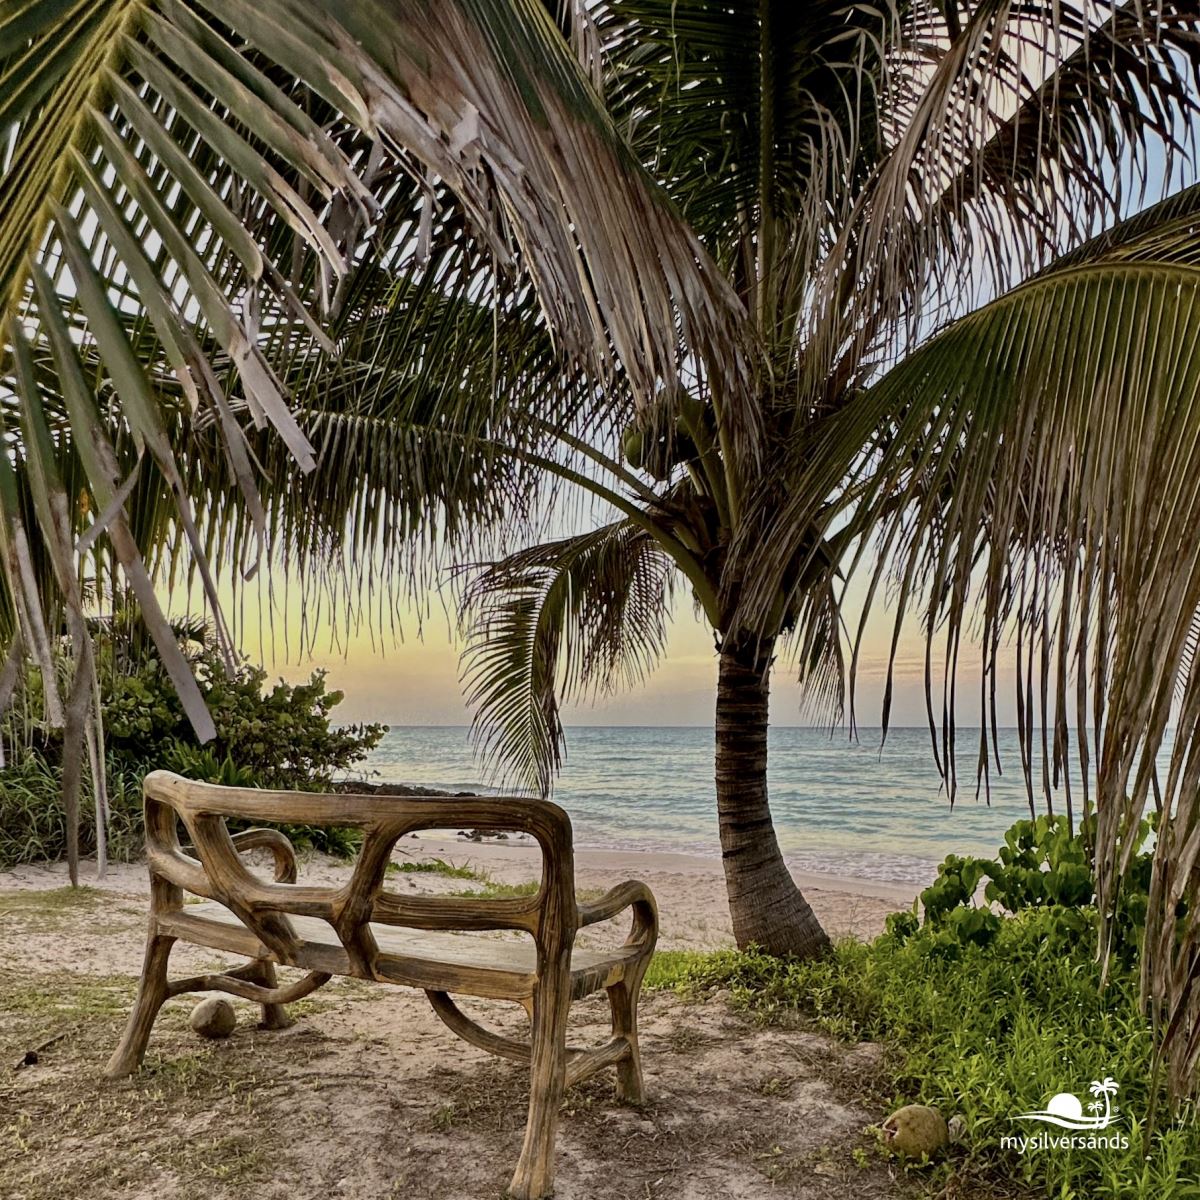 west beach bench and coconut tree